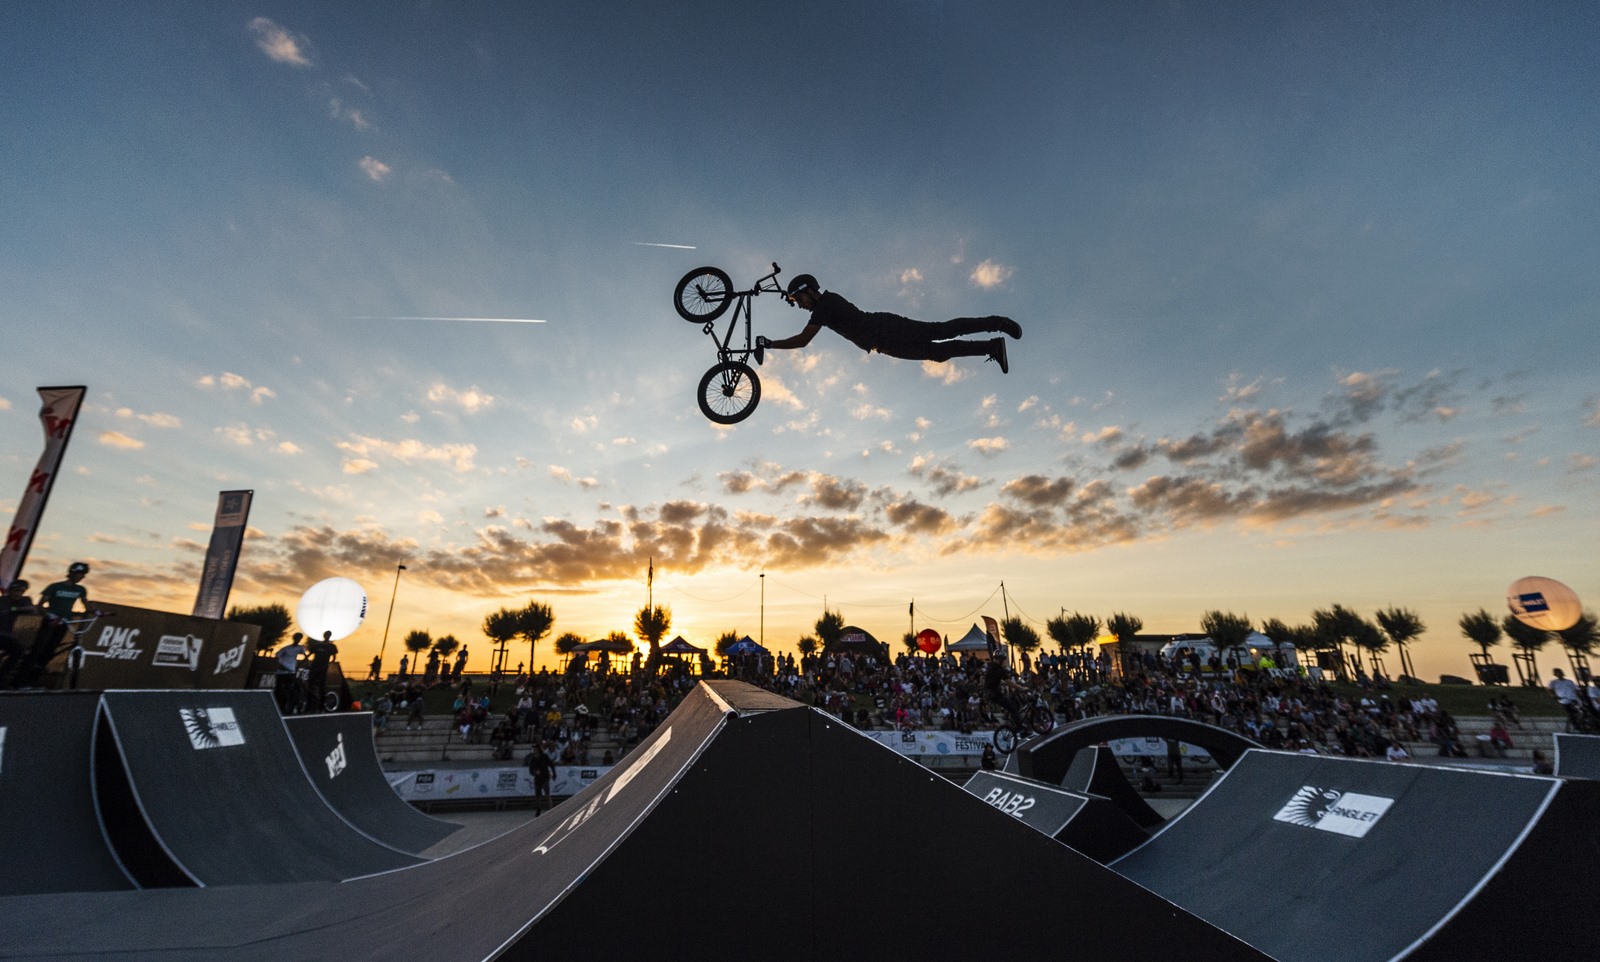 FISE Experience Anglet 2018